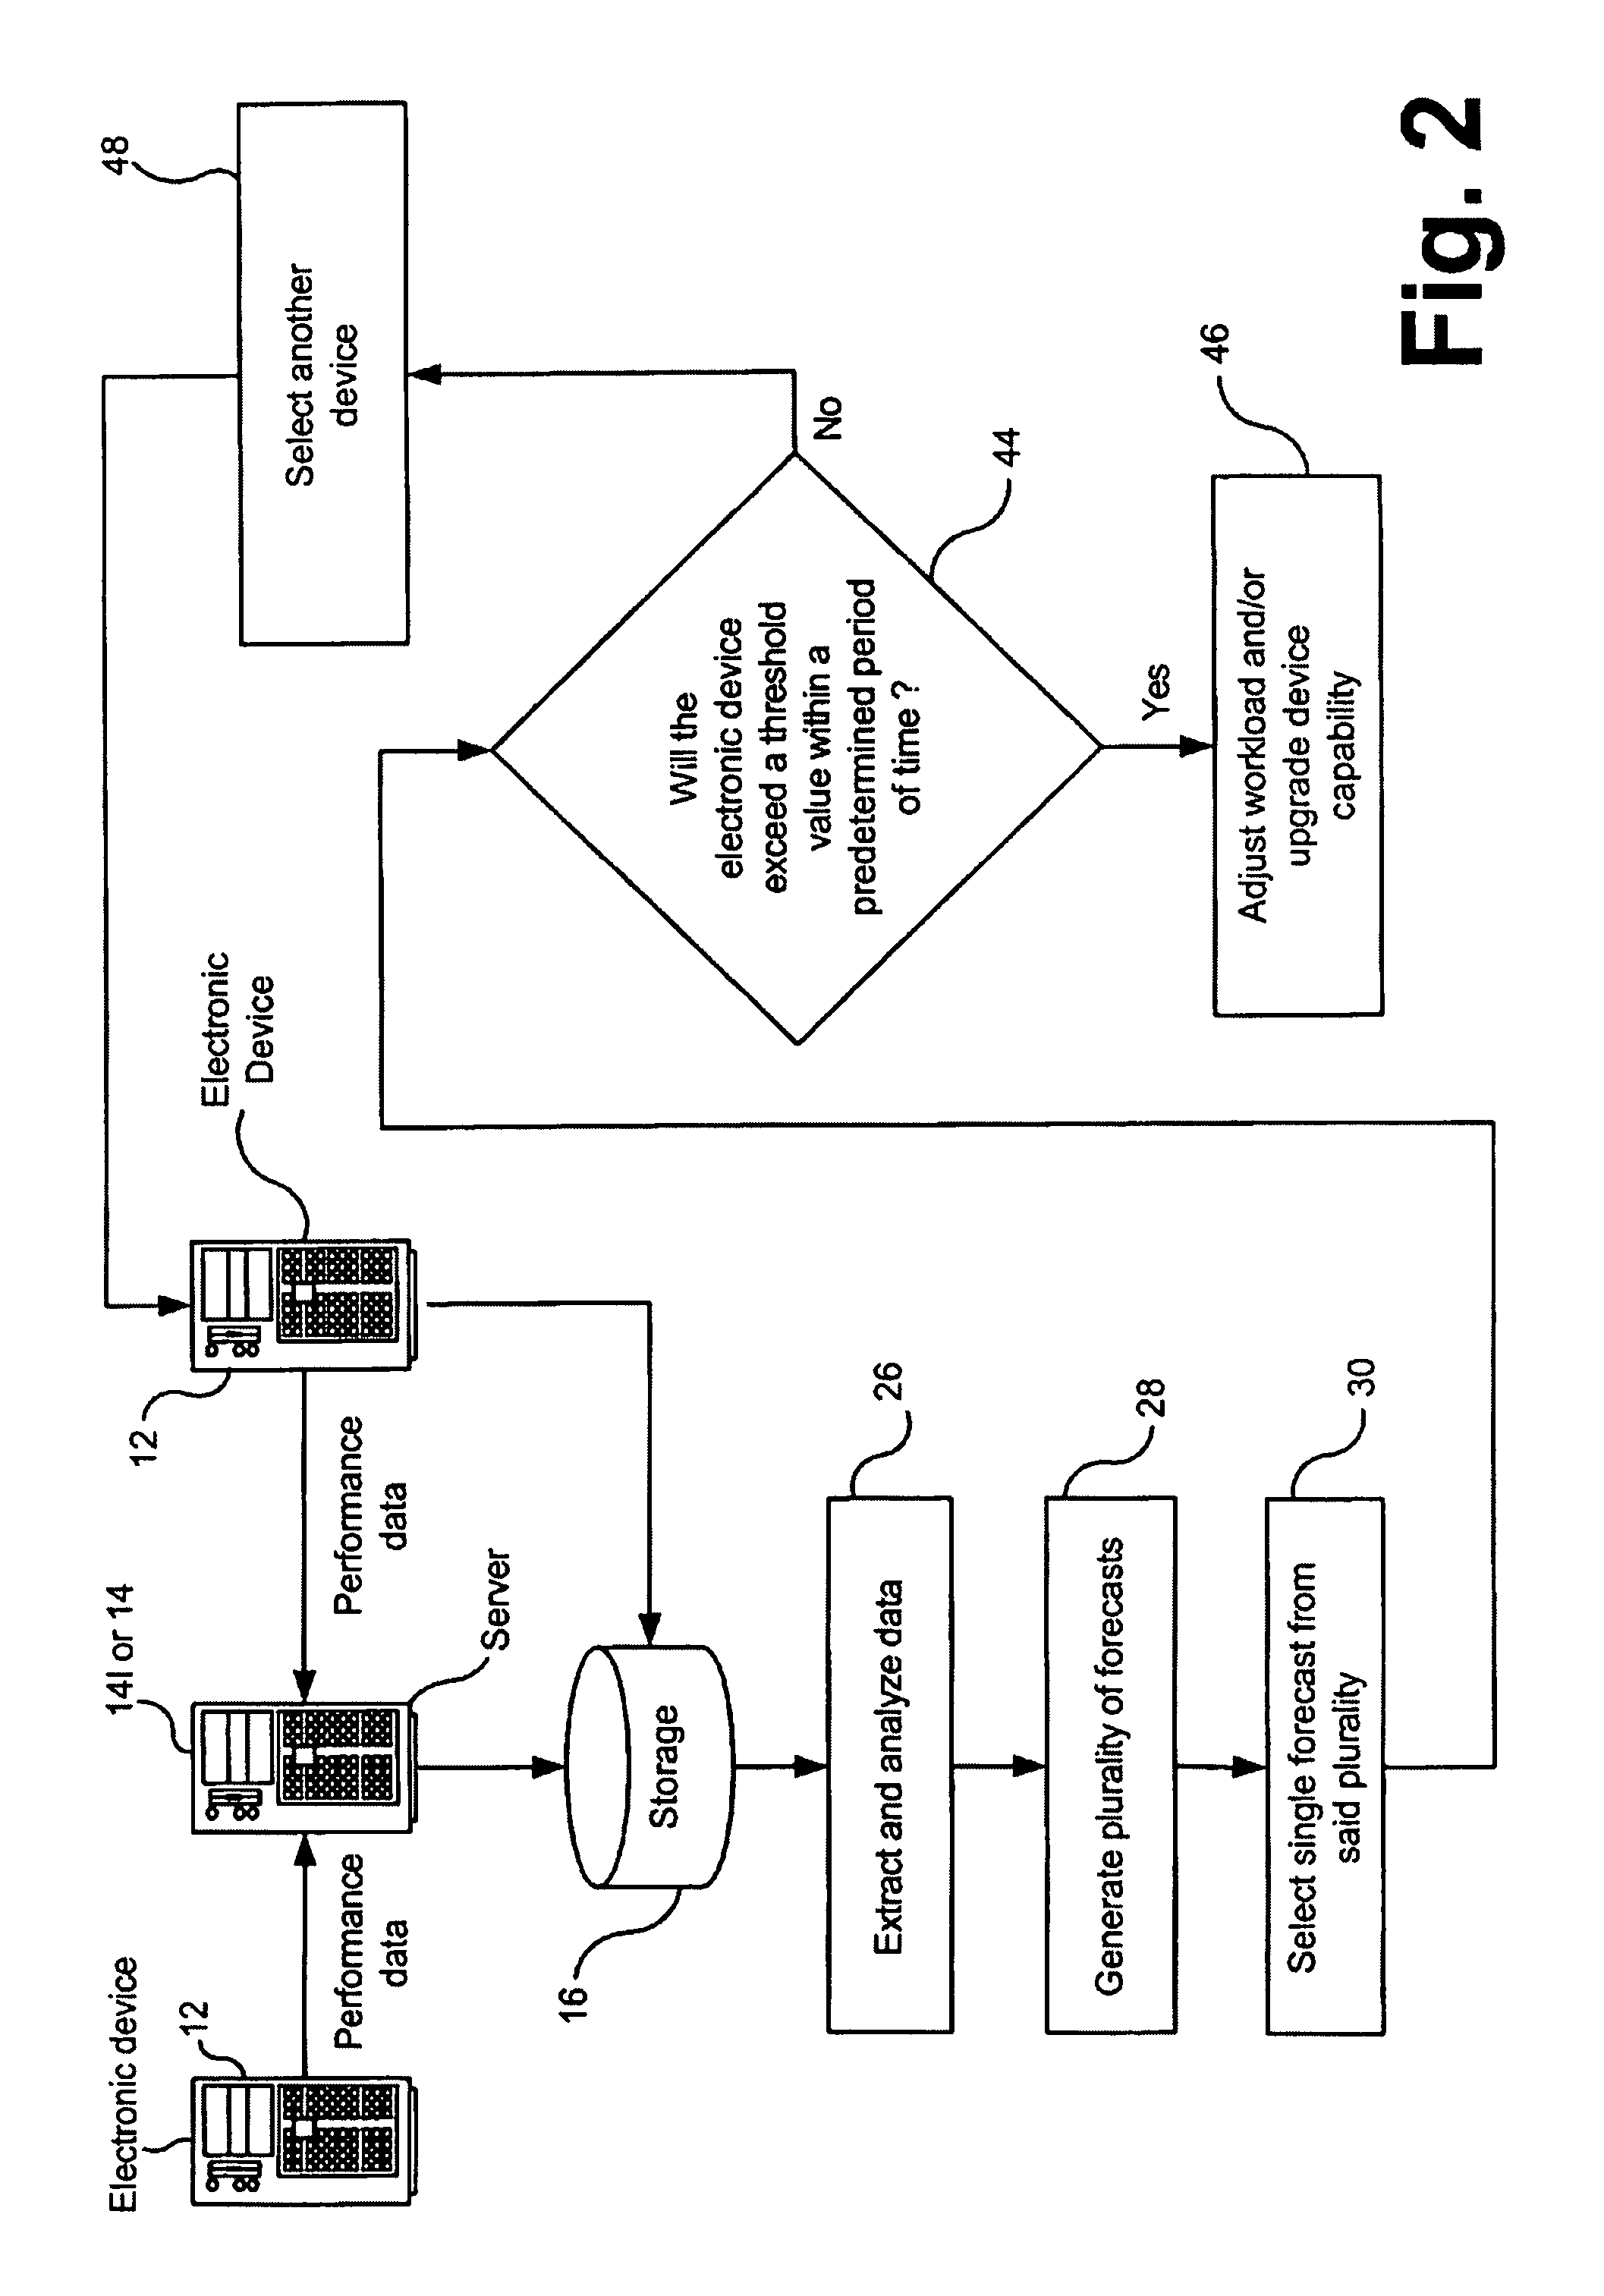 Managing the performance of an electronic device